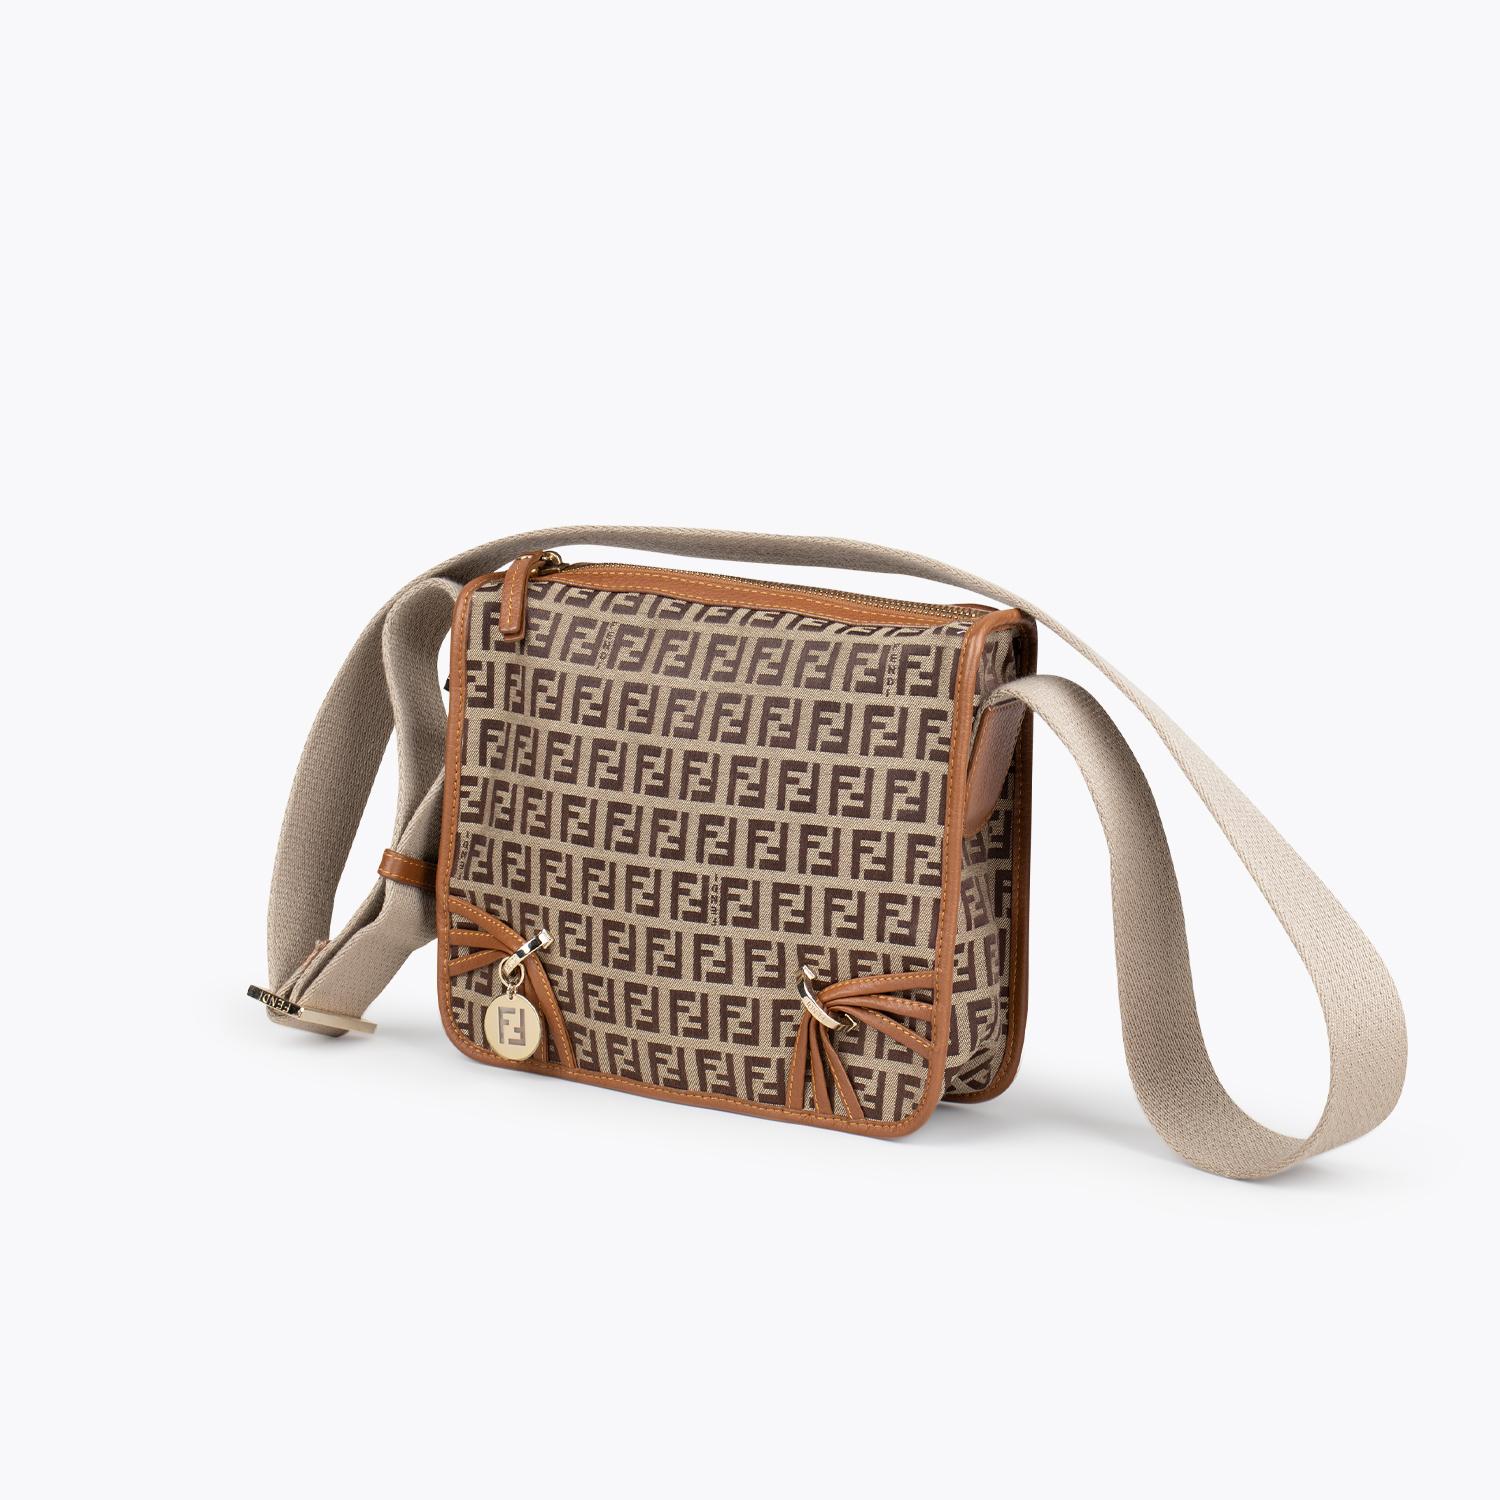 Fendi Leather-Trimmed Zucchino Crossbody Bag

- Fendi Crossbody Bag
- Neutrals
- Graphic Print
- Zucchino FF Logo
- Gold-Tone Hardware
- Single Adjustable Shoulder Strap
- Single interior Pocket
- Logo Jacquard Lining and Zip Closure at Top

Overall